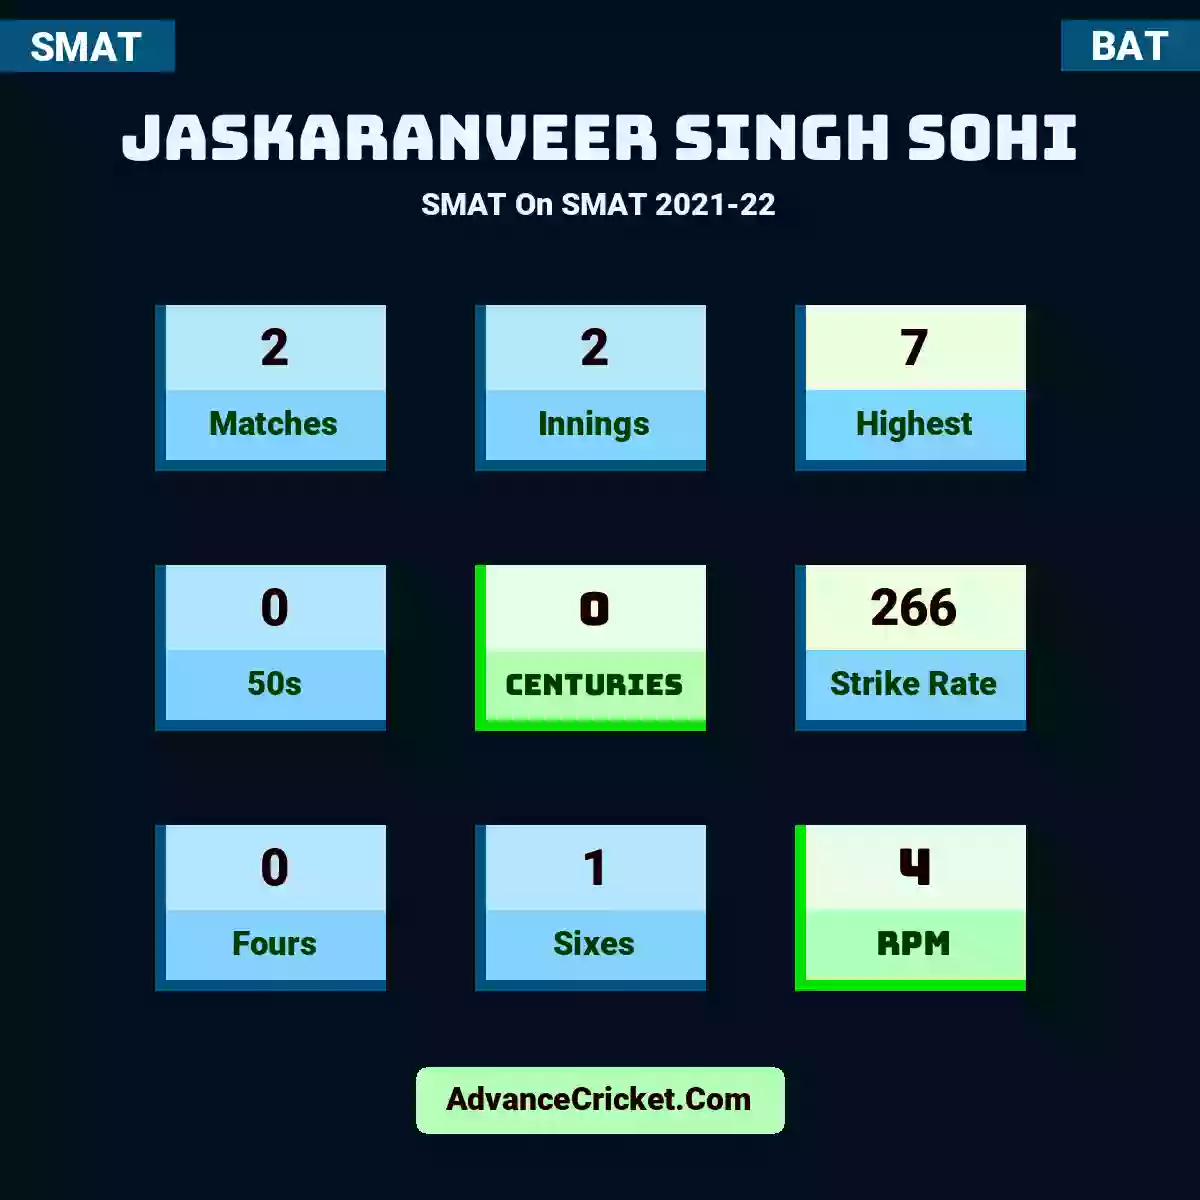 Jaskaranveer Singh Sohi SMAT  On SMAT 2021-22, Jaskaranveer Singh Sohi played 2 matches, scored 7 runs as highest, 0 half-centuries, and 0 centuries, with a strike rate of 266. J.Sohi hit 0 fours and 1 sixes, with an RPM of 4.